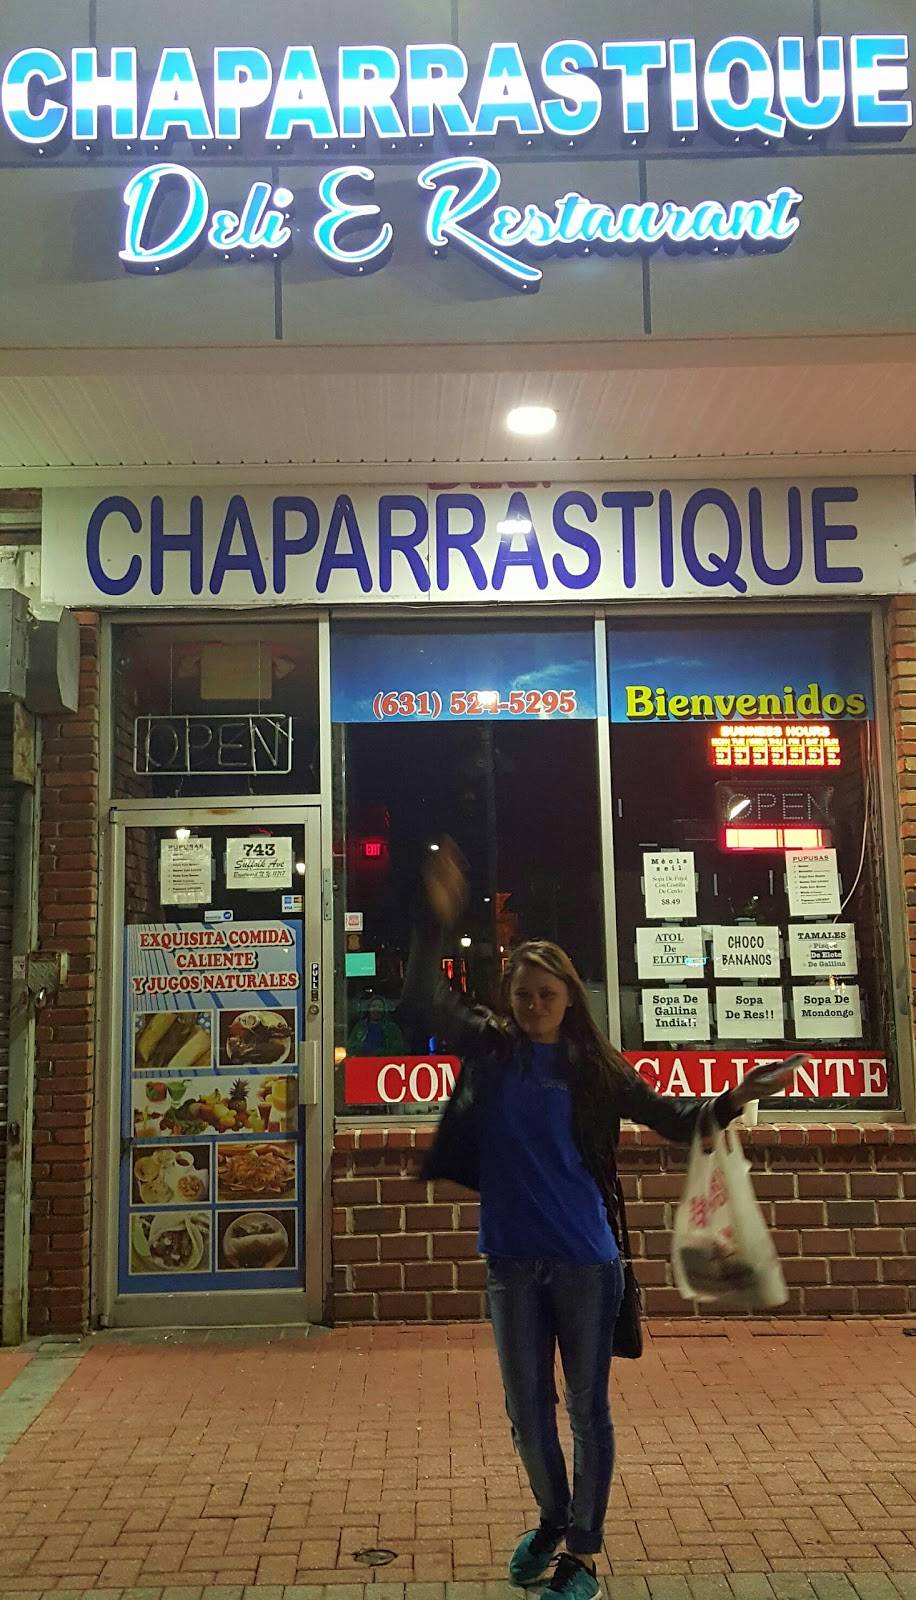 Deli CHAPARRASTIQUE | restaurant | 743 Suffolk Ave, Brentwood, NY 11717, USA | 6315245295 OR +1 631-524-5295